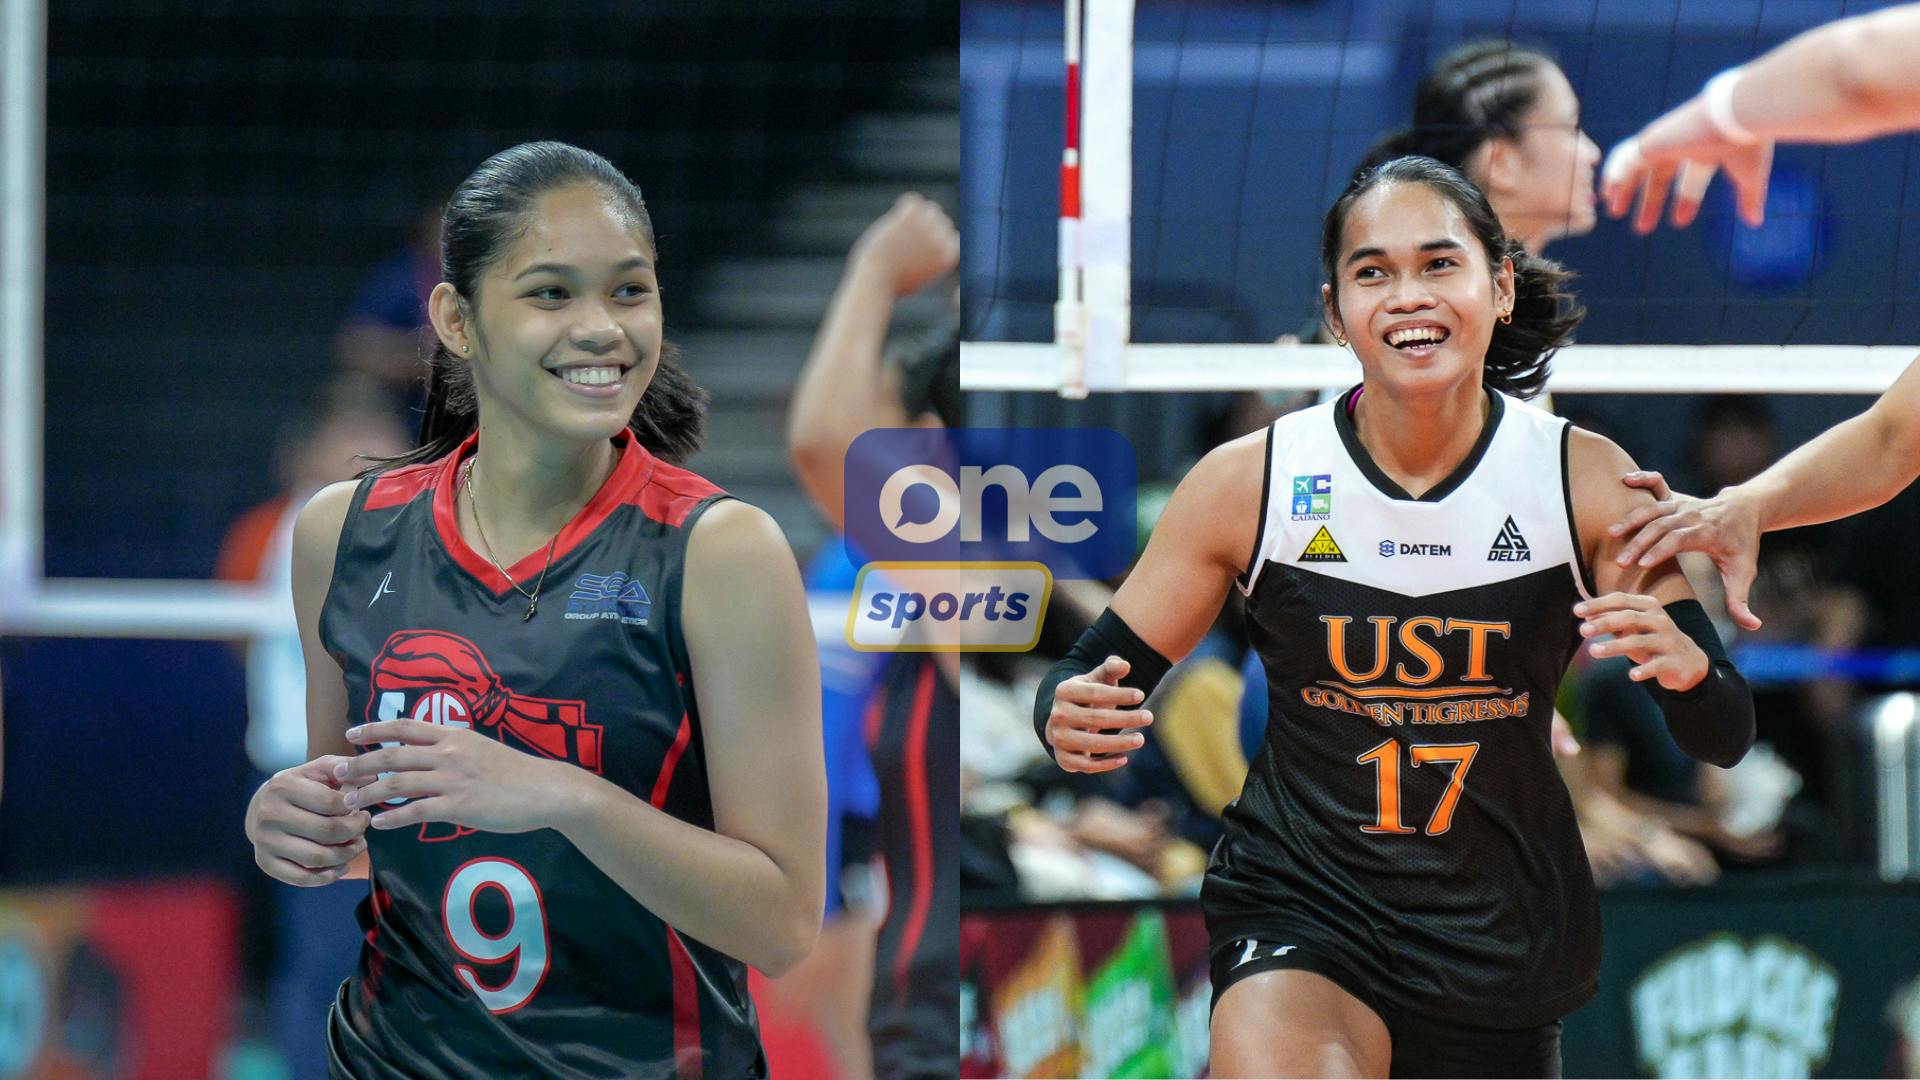 UAAP: UST wary of ‘young but experienced’ Lady Warriors ahead of highly-anticipated match